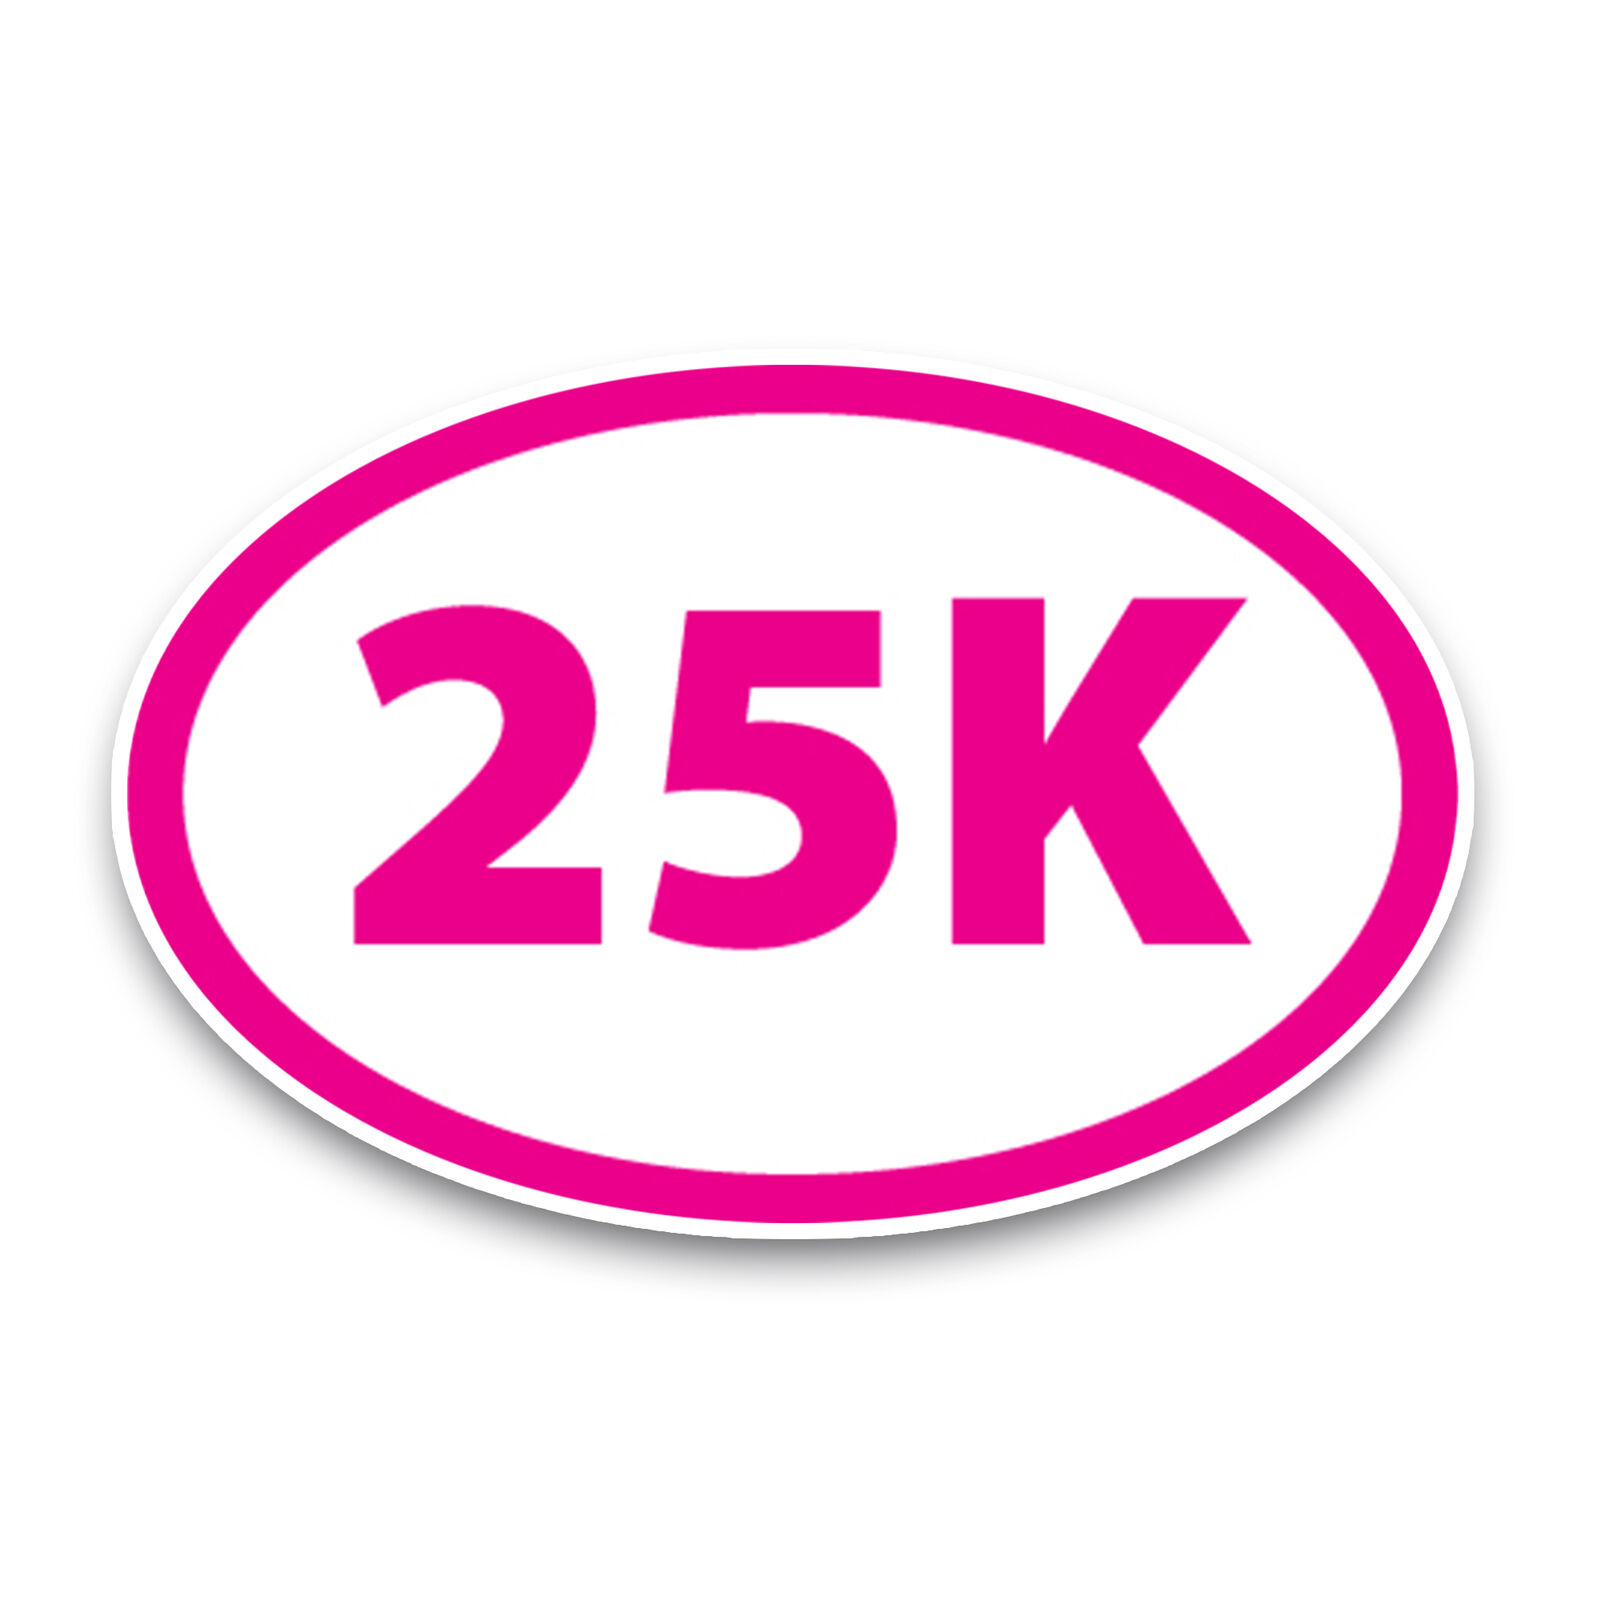 25K Marathon Pink Oval Magnet Decal, 4x6 Inches, Automotive Magnet